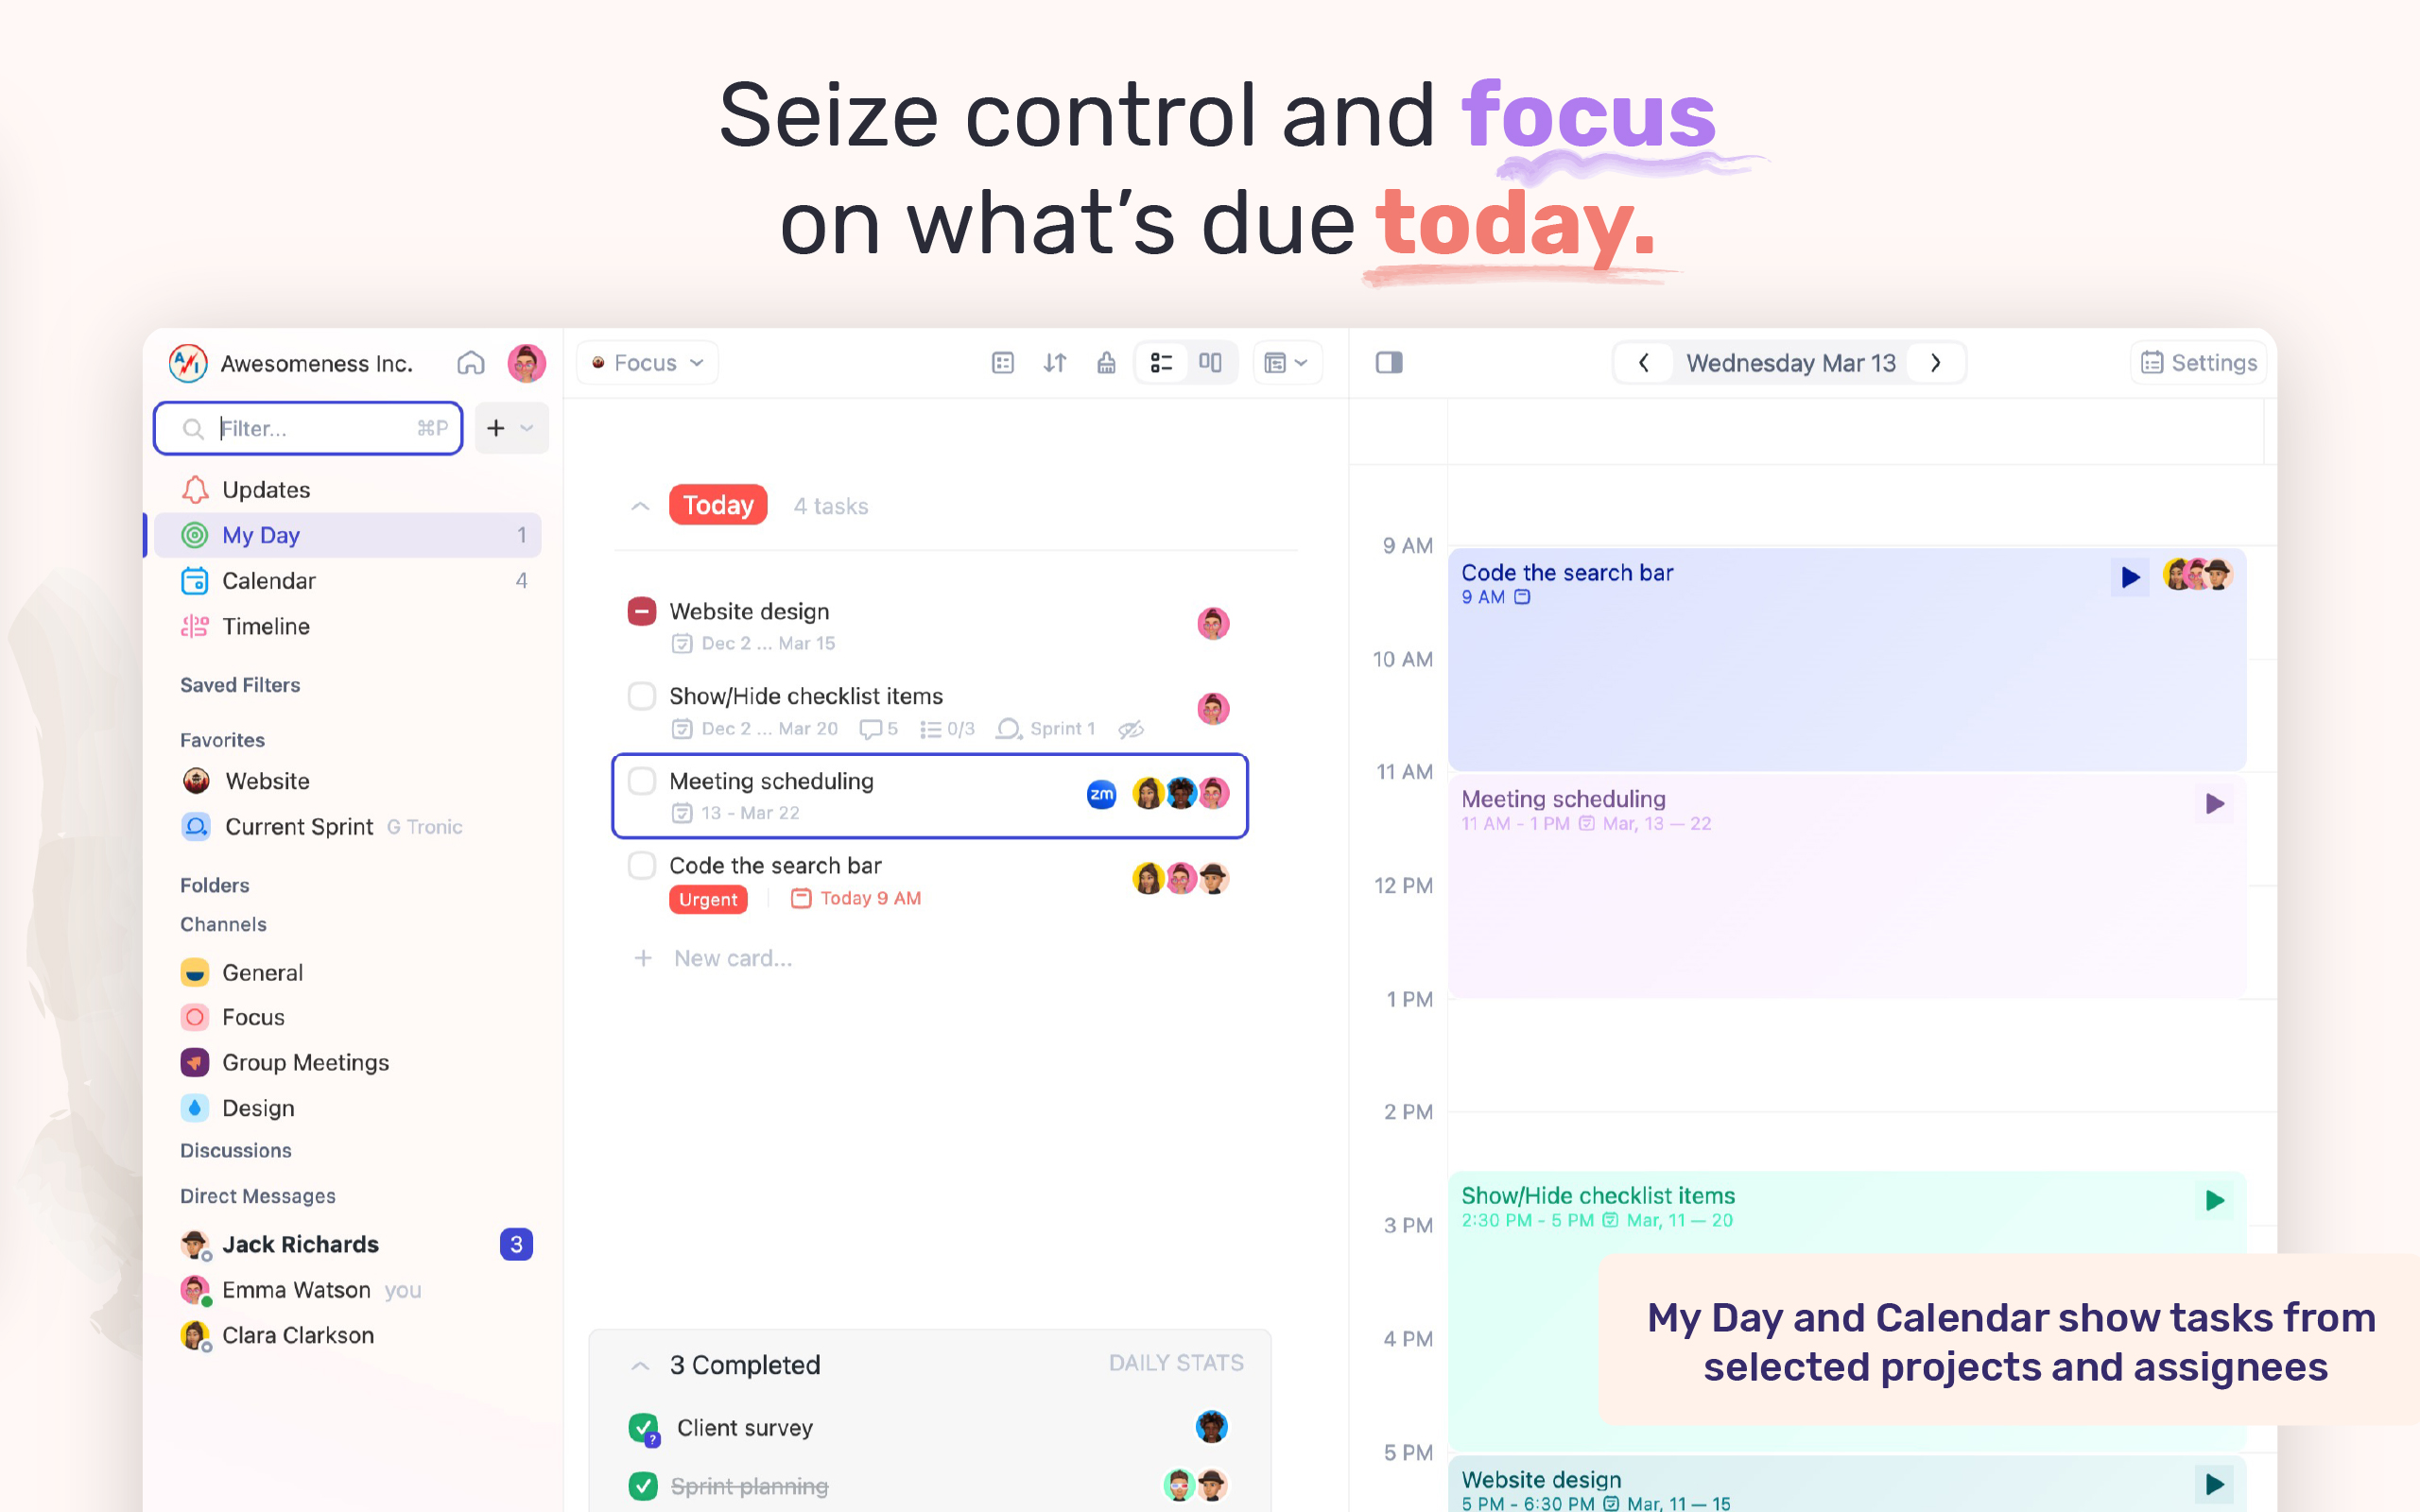 Focus on today's scheduled tasks, while seeing your events and other calendar items.